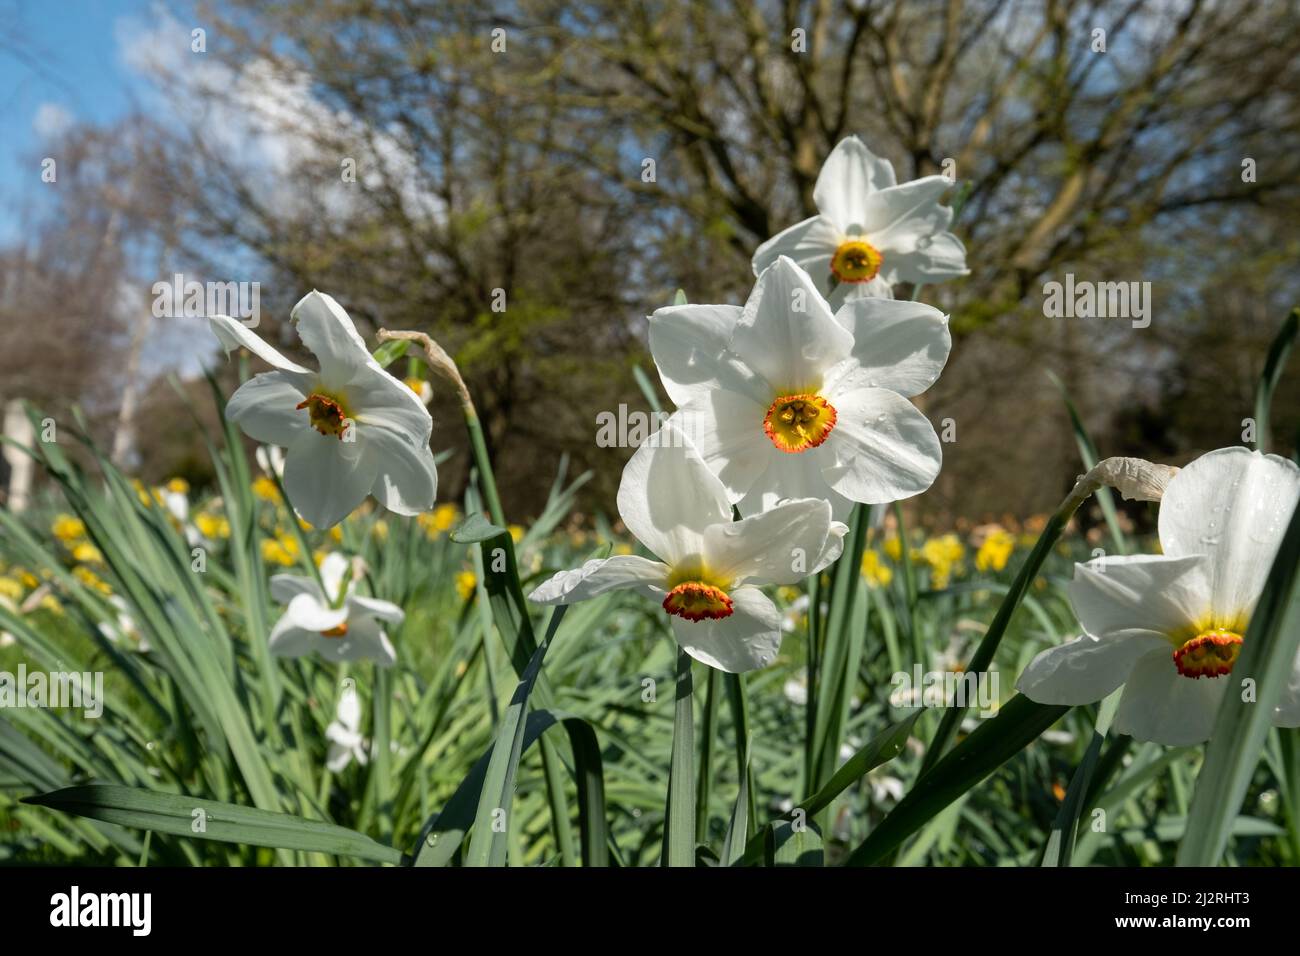 White Poet's Narcissus daffodil flowers (Narcissus poeticus, Pheasant's Eye) with yellow and red centre, photographed in Magdelen Meadow, Oxford, UK. Stock Photo